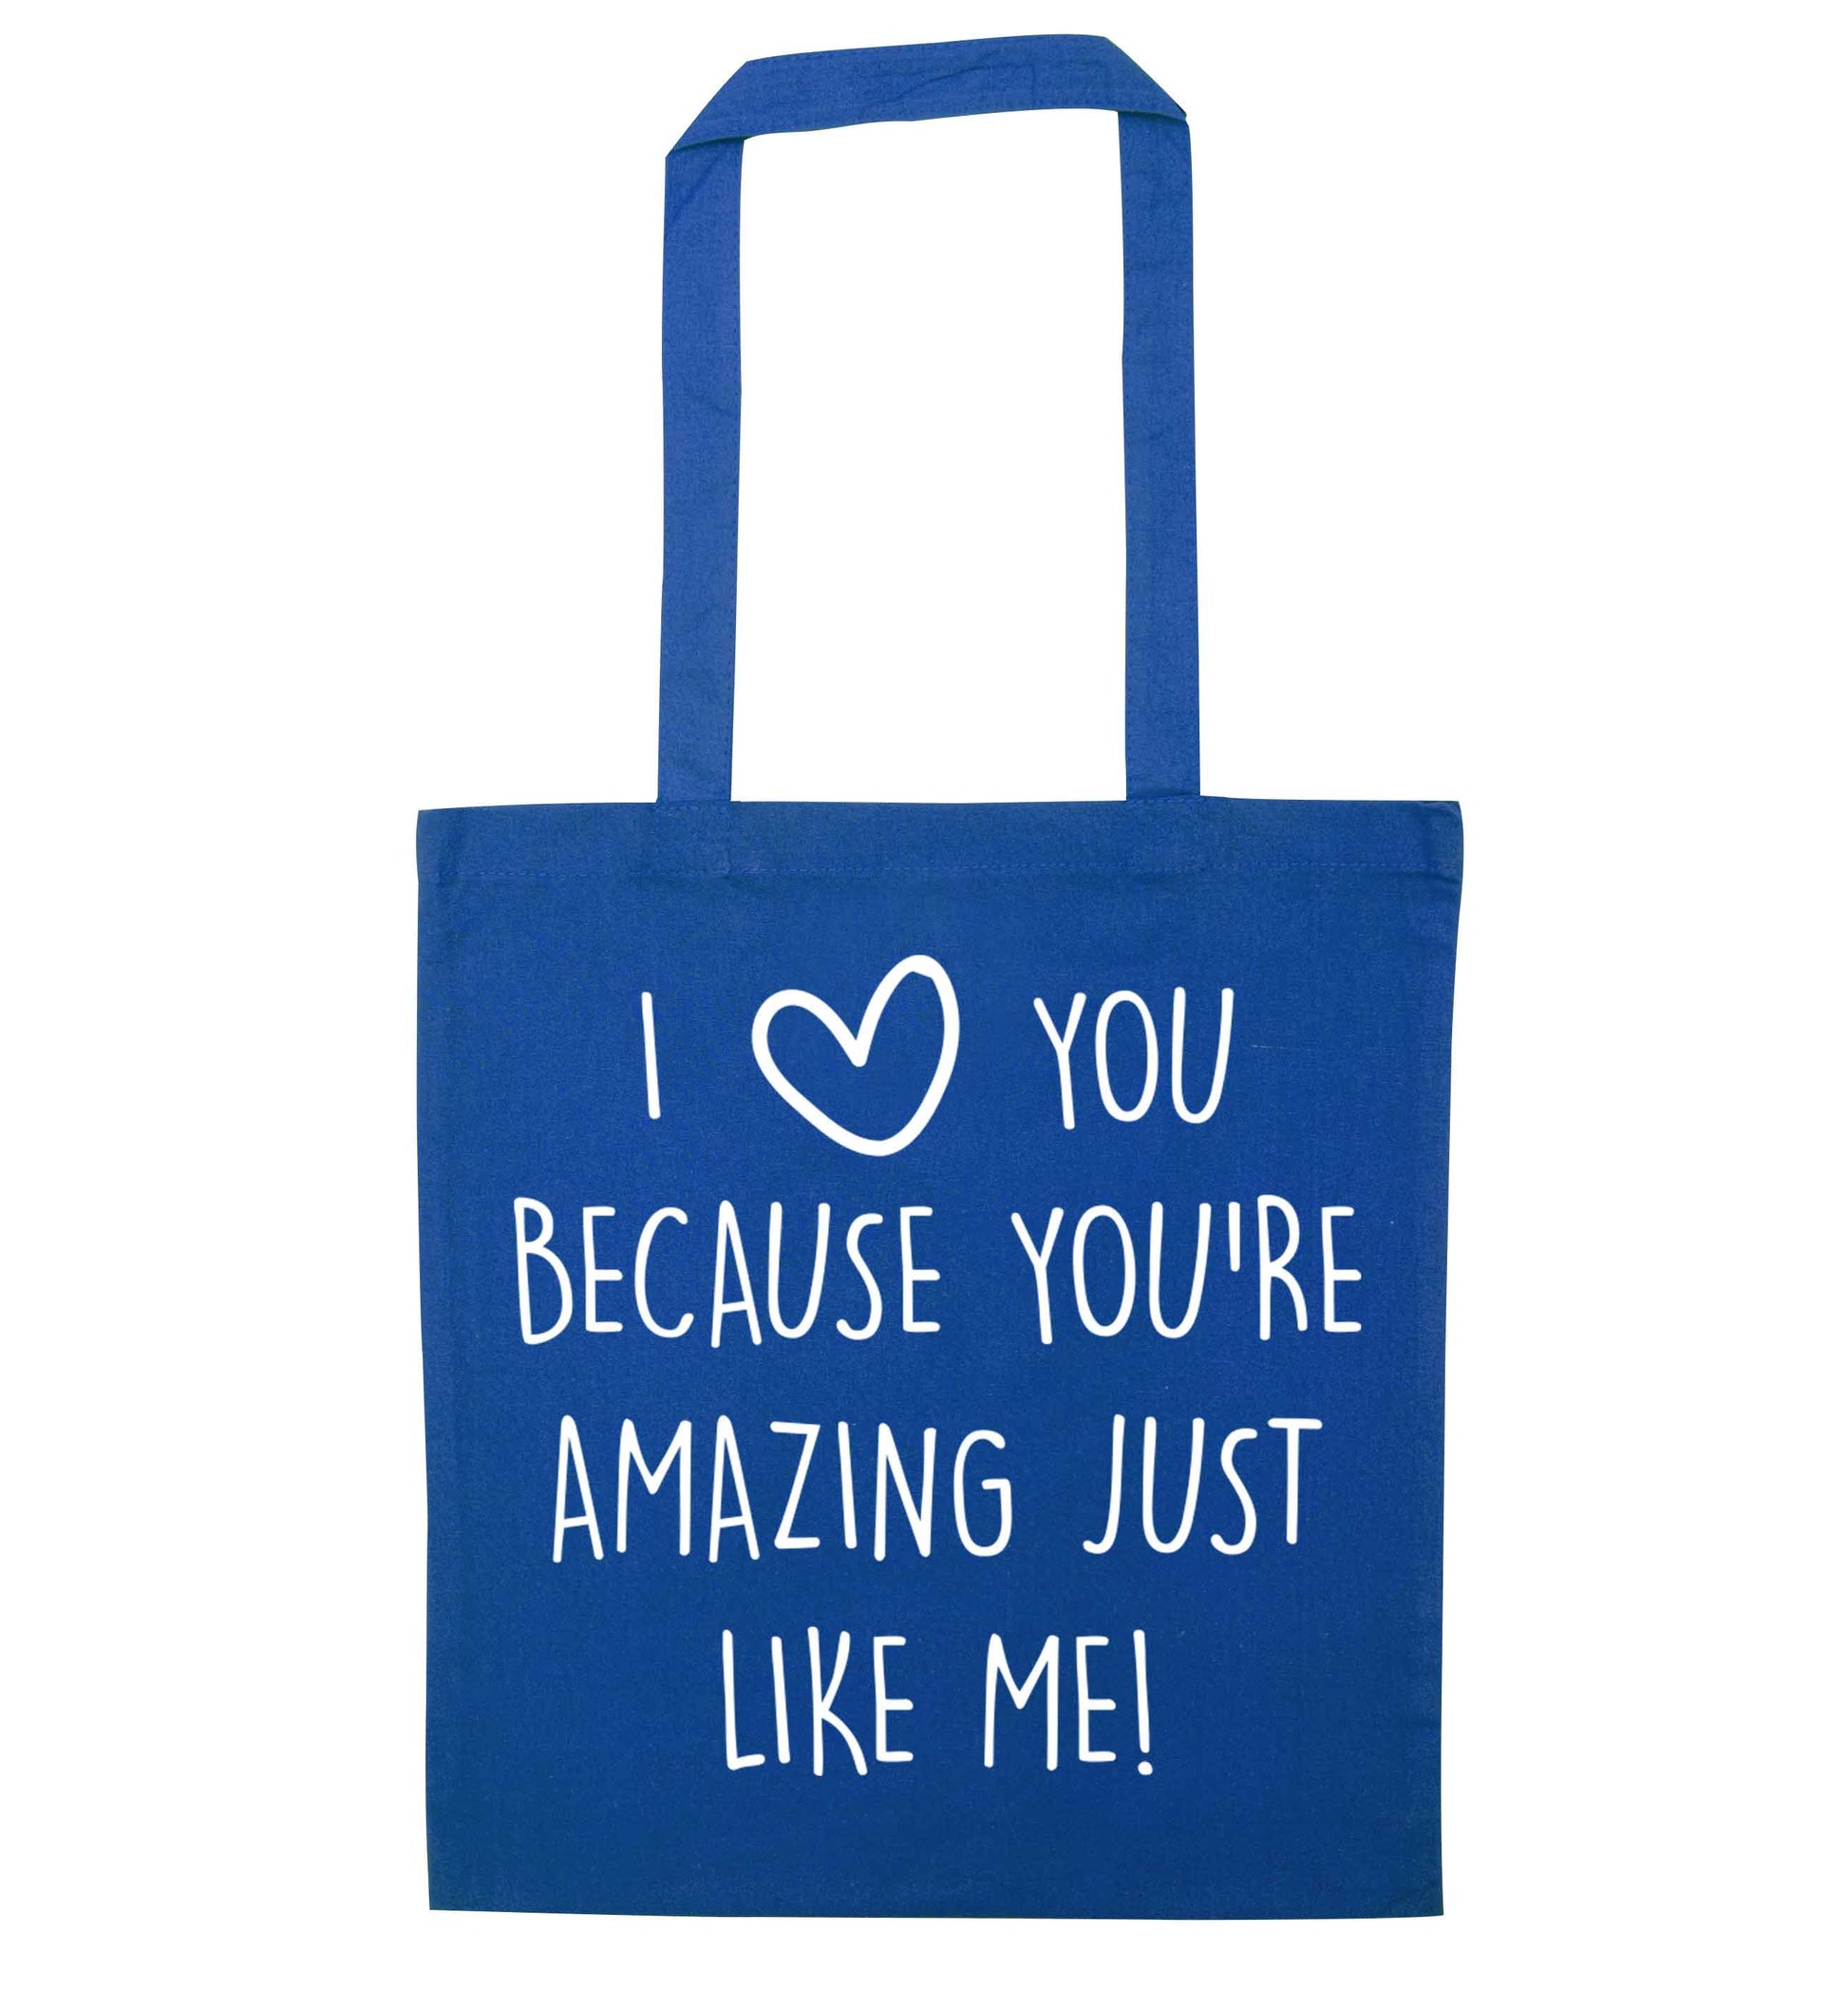 I love you because you're amazing just like me blue tote bag